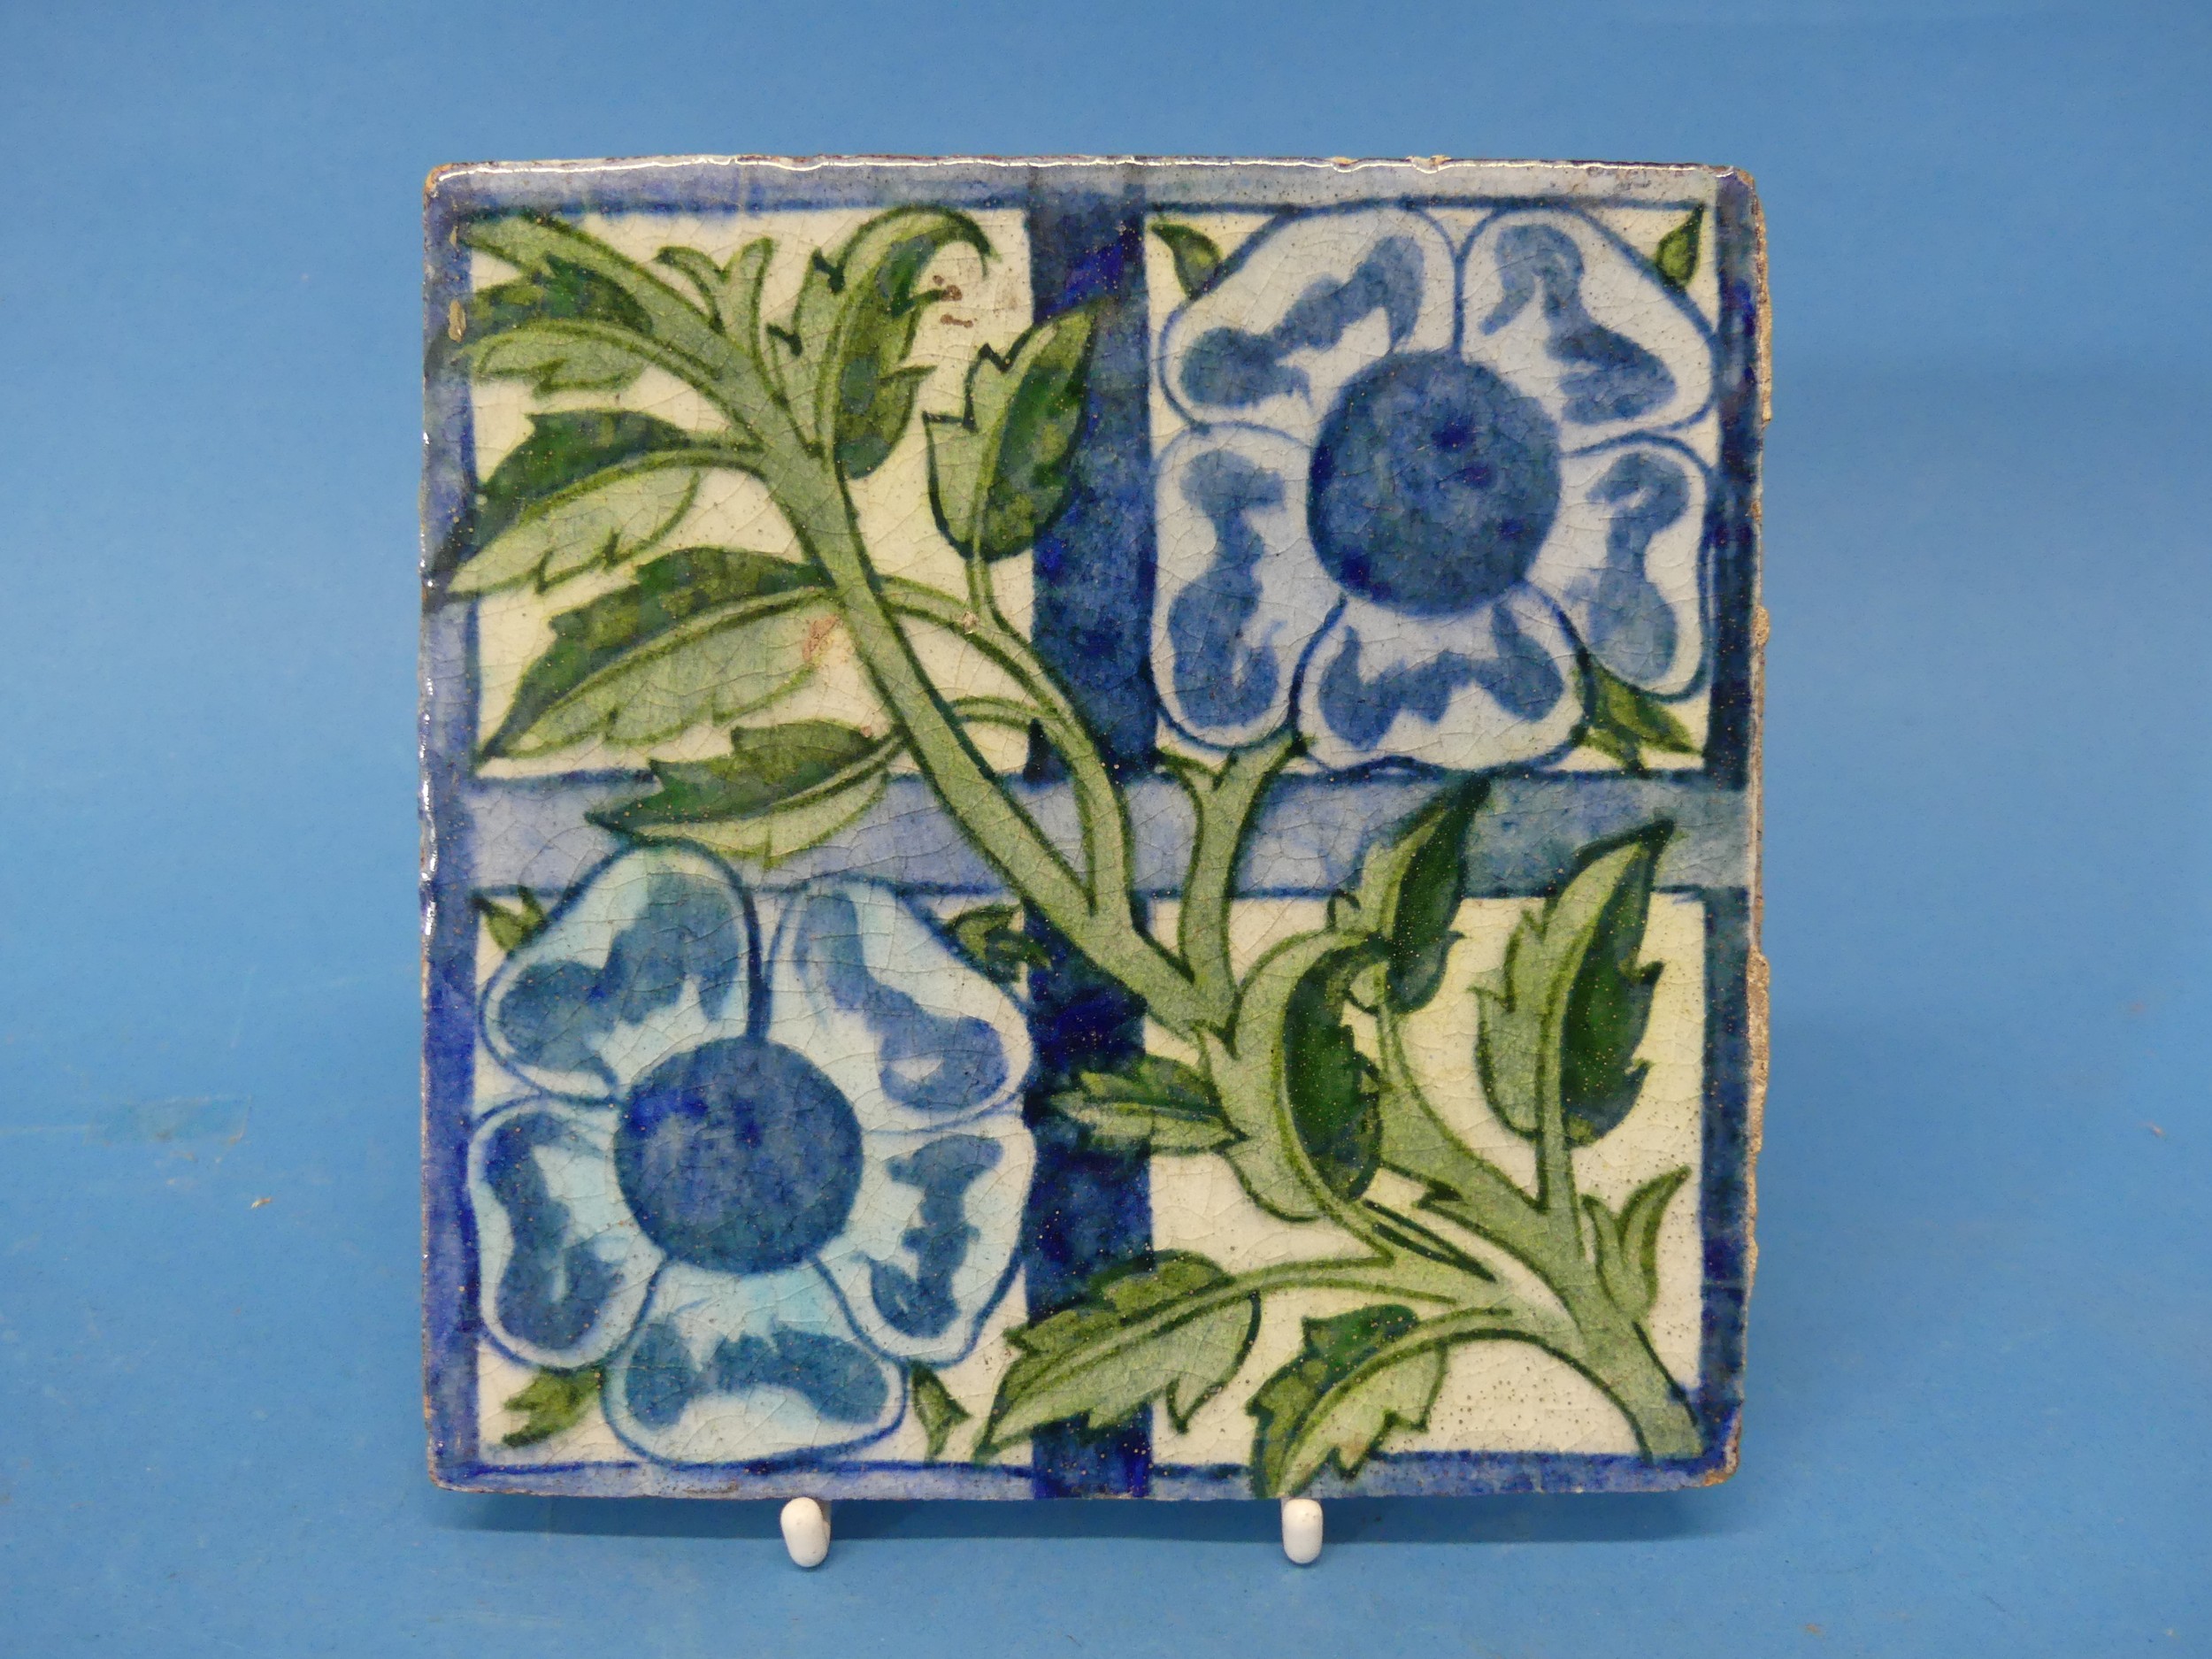 A William de Morgan 'Rose Trellis' pattern Tile, the tile decorated with rose and trellis, in greens